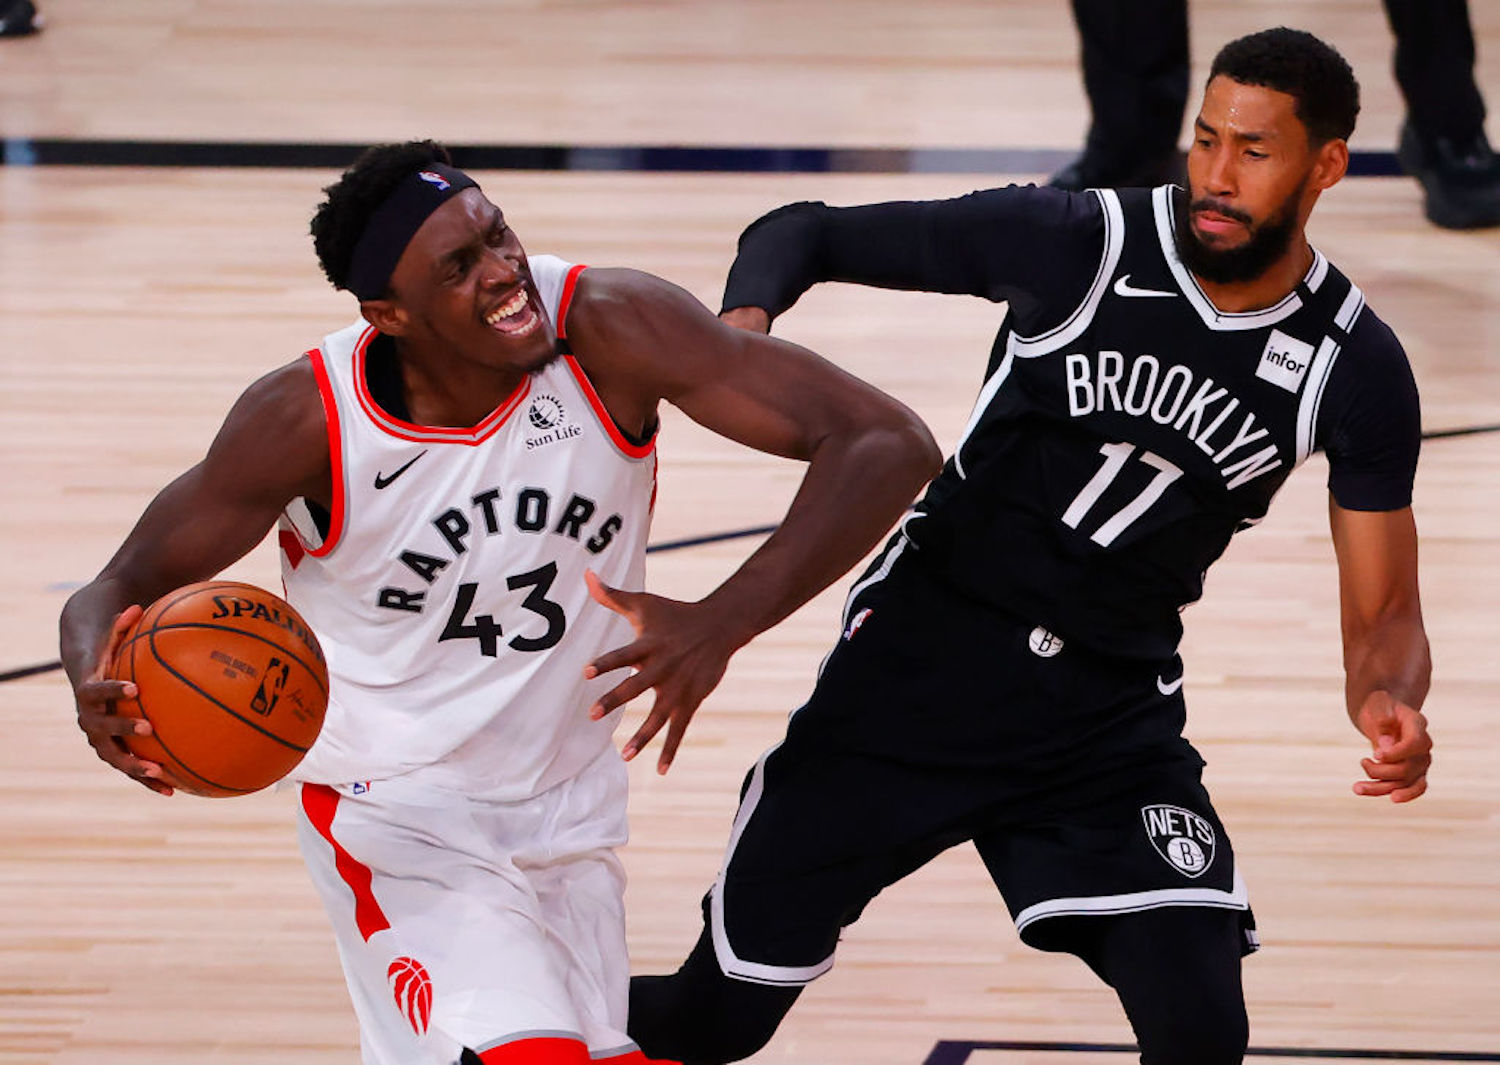 Pascal Siakam was thought to be a budding superstar for the Toronto Raptors, but his recent performances might tell a different story.